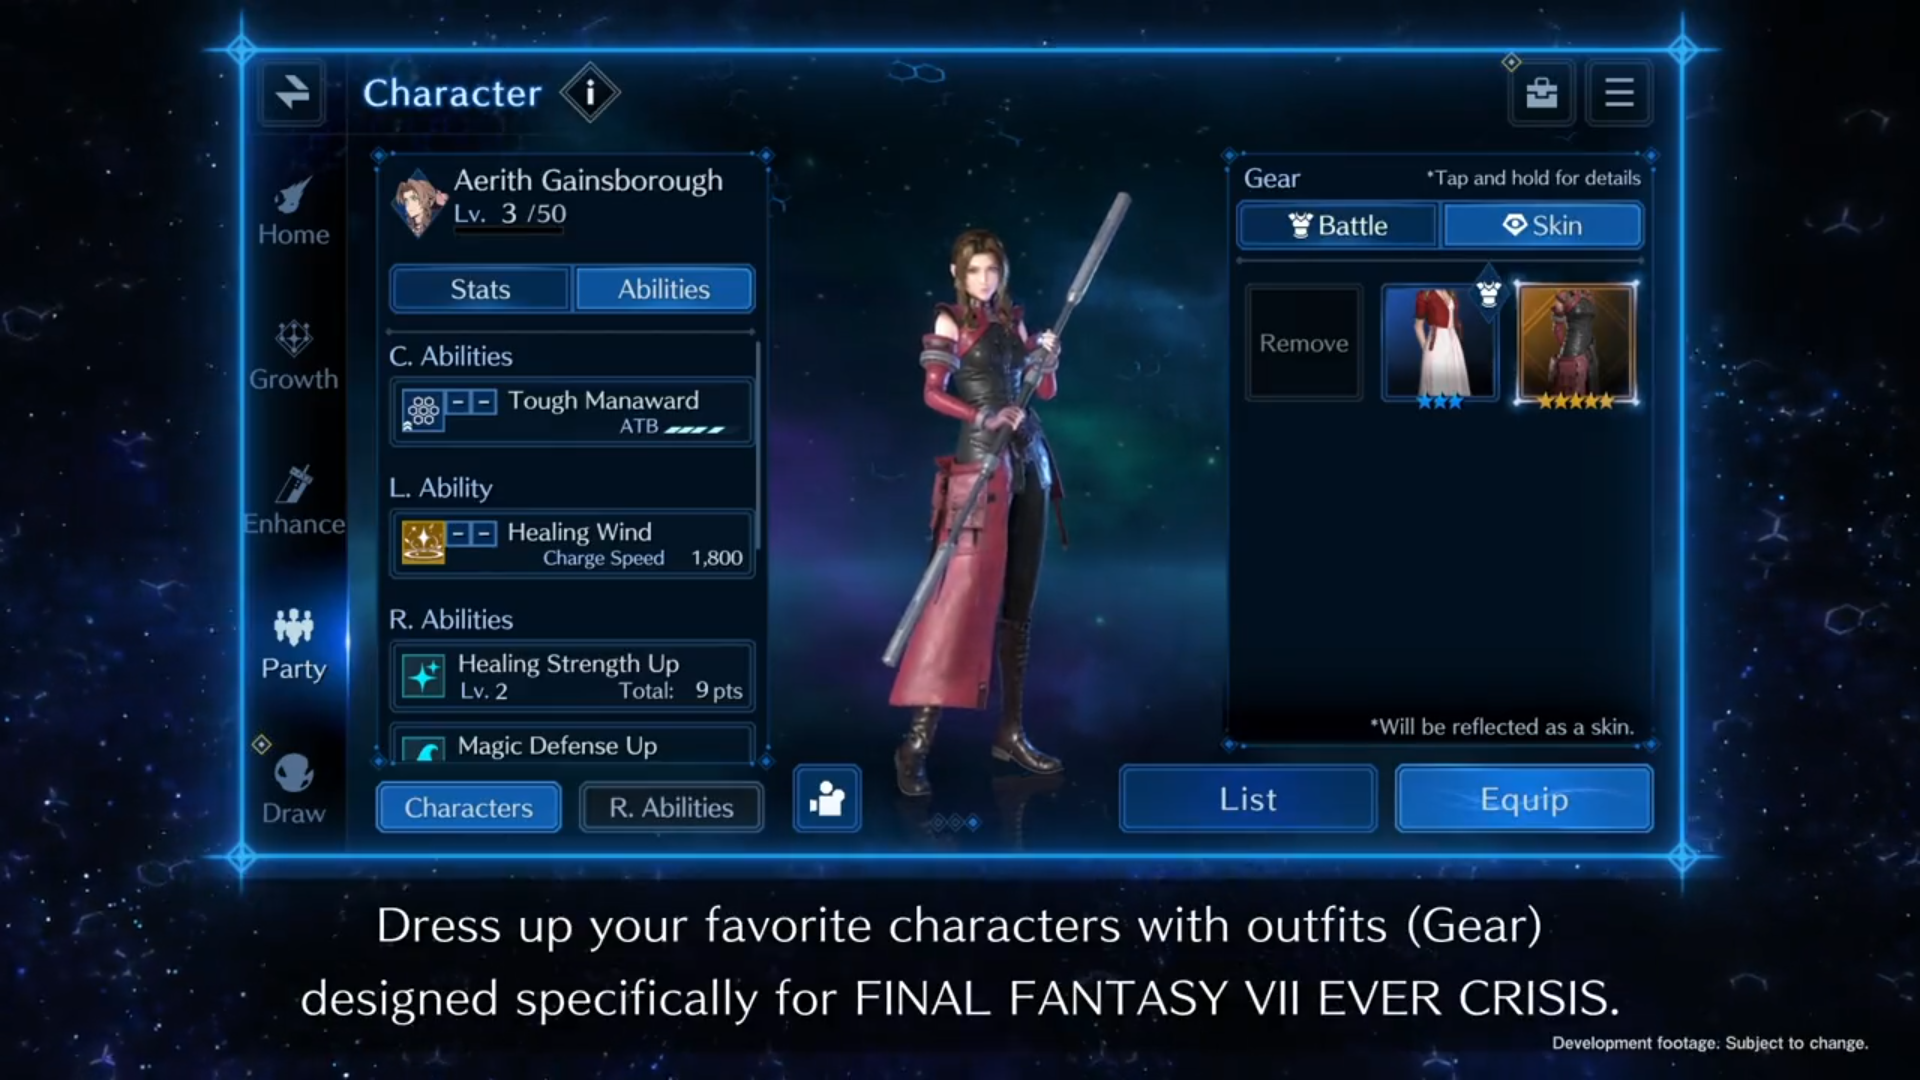 New Final Fantasy VII: Ever Crisis Trailer Highlights Outfits - Noisy Pixel